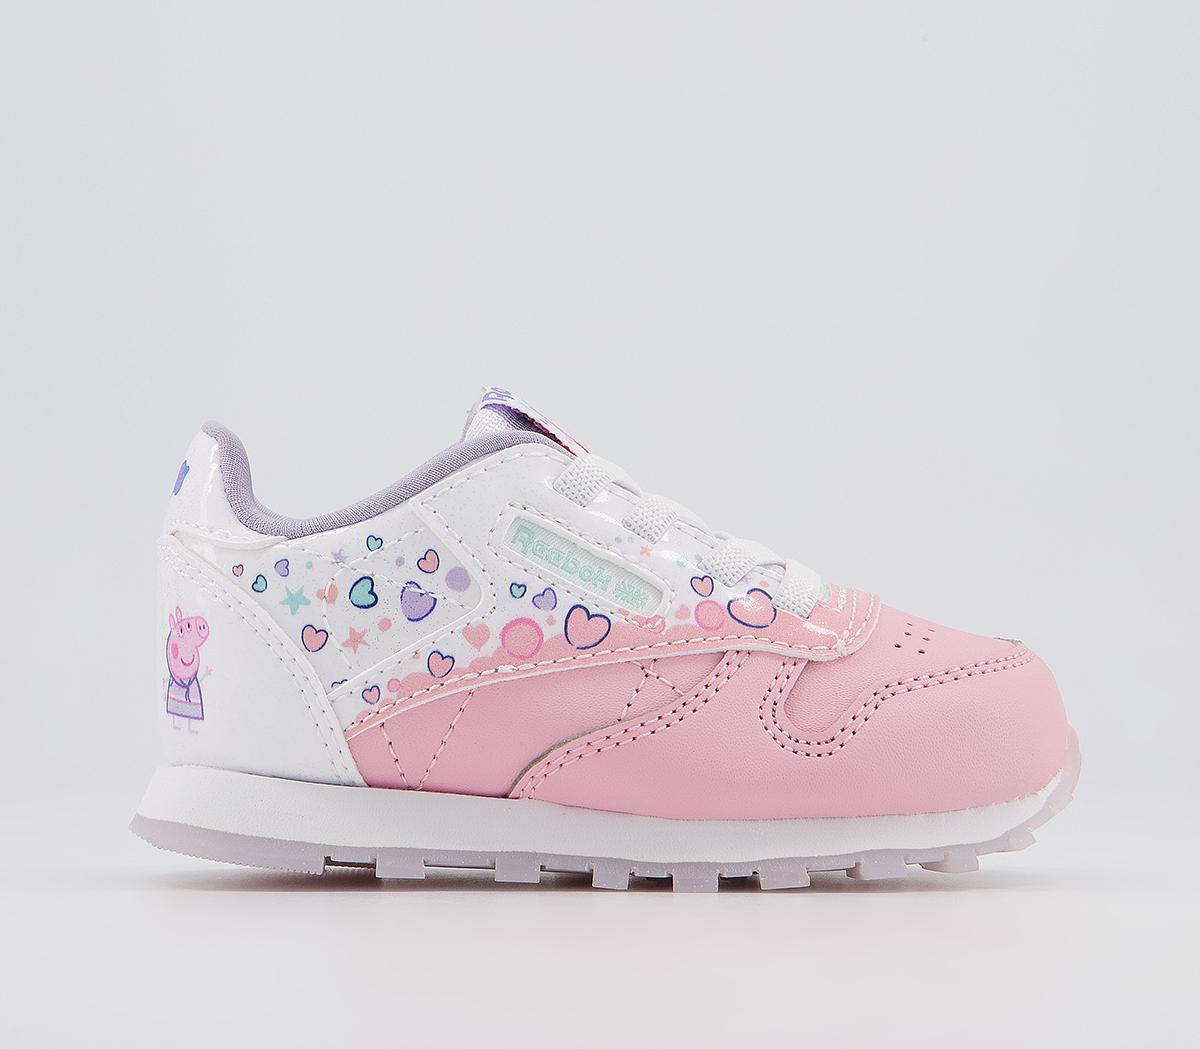 ReebokClassic Leather Toddler TrainersPeppa Pig Atomic Pink White